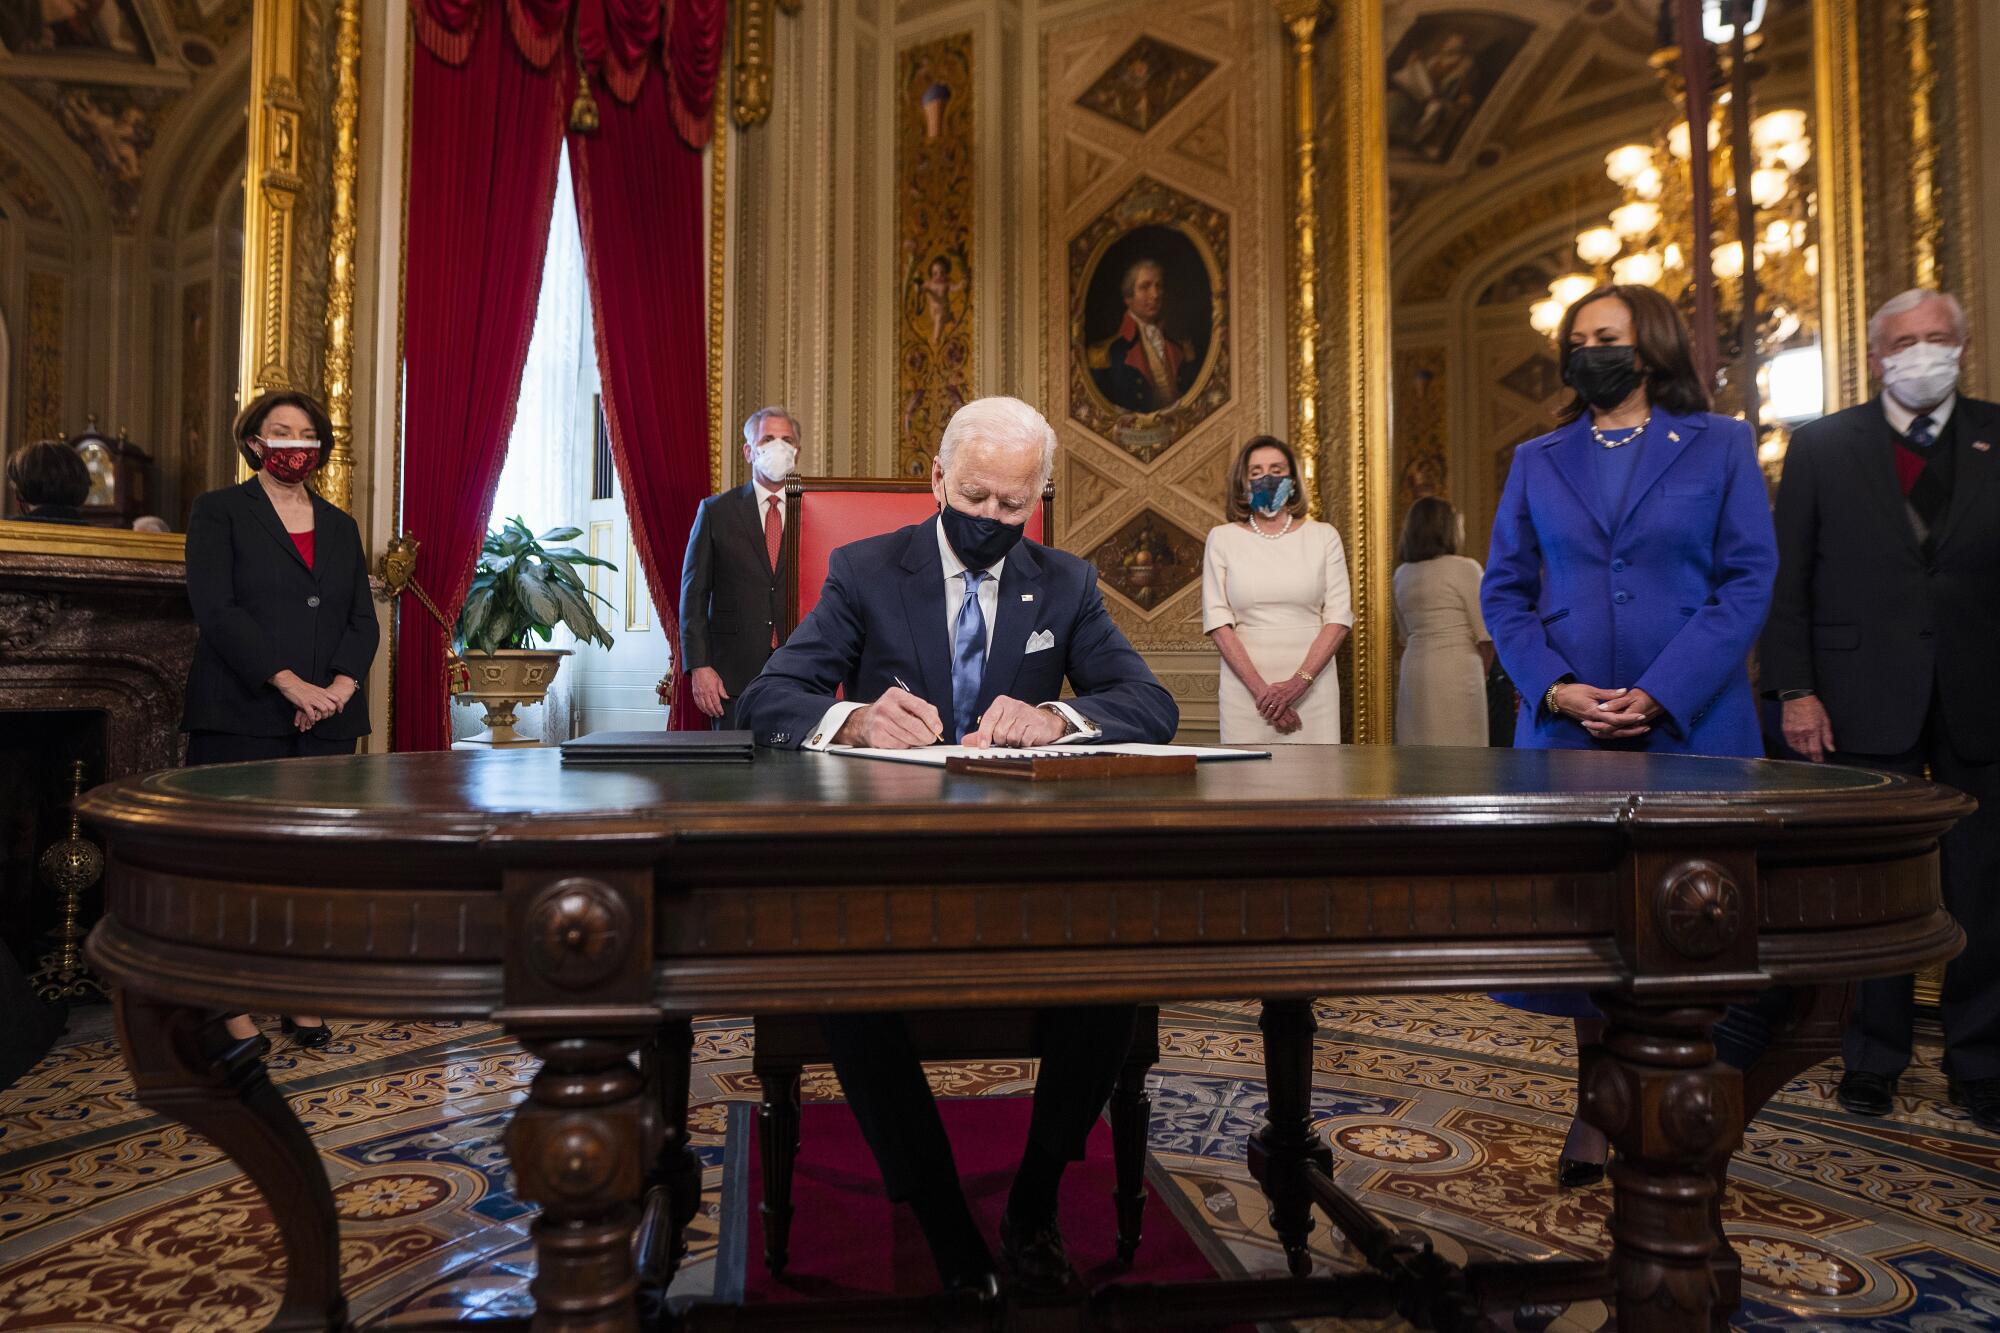 Biden, at an ornate table, signs documents. Among those standing, socially distanced, is Kamala Harris.